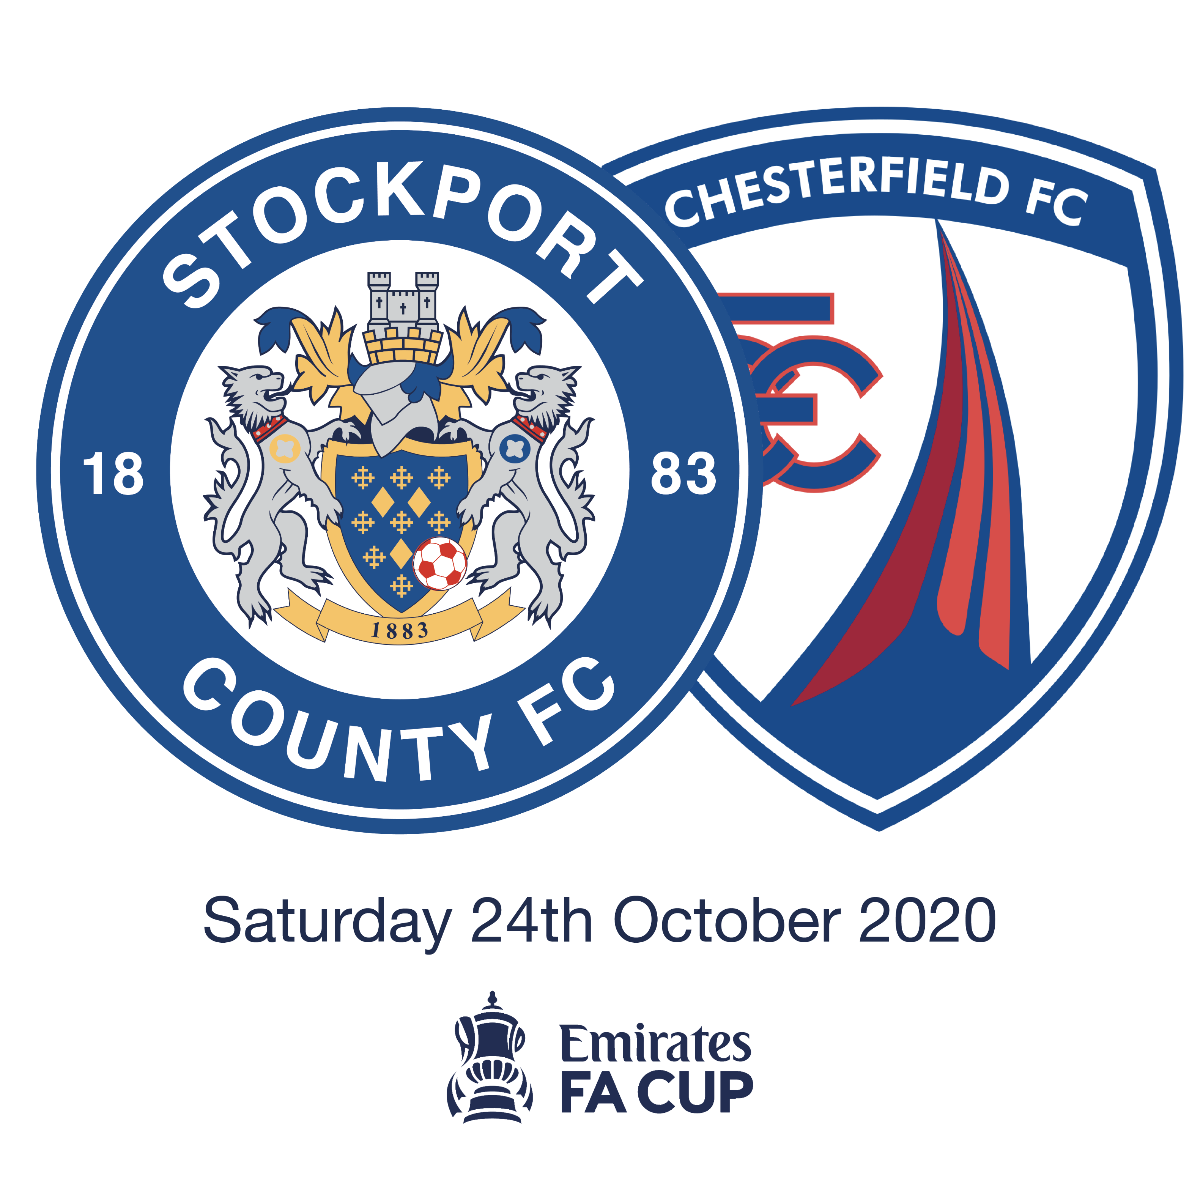 Stockport County VS Chesterfield